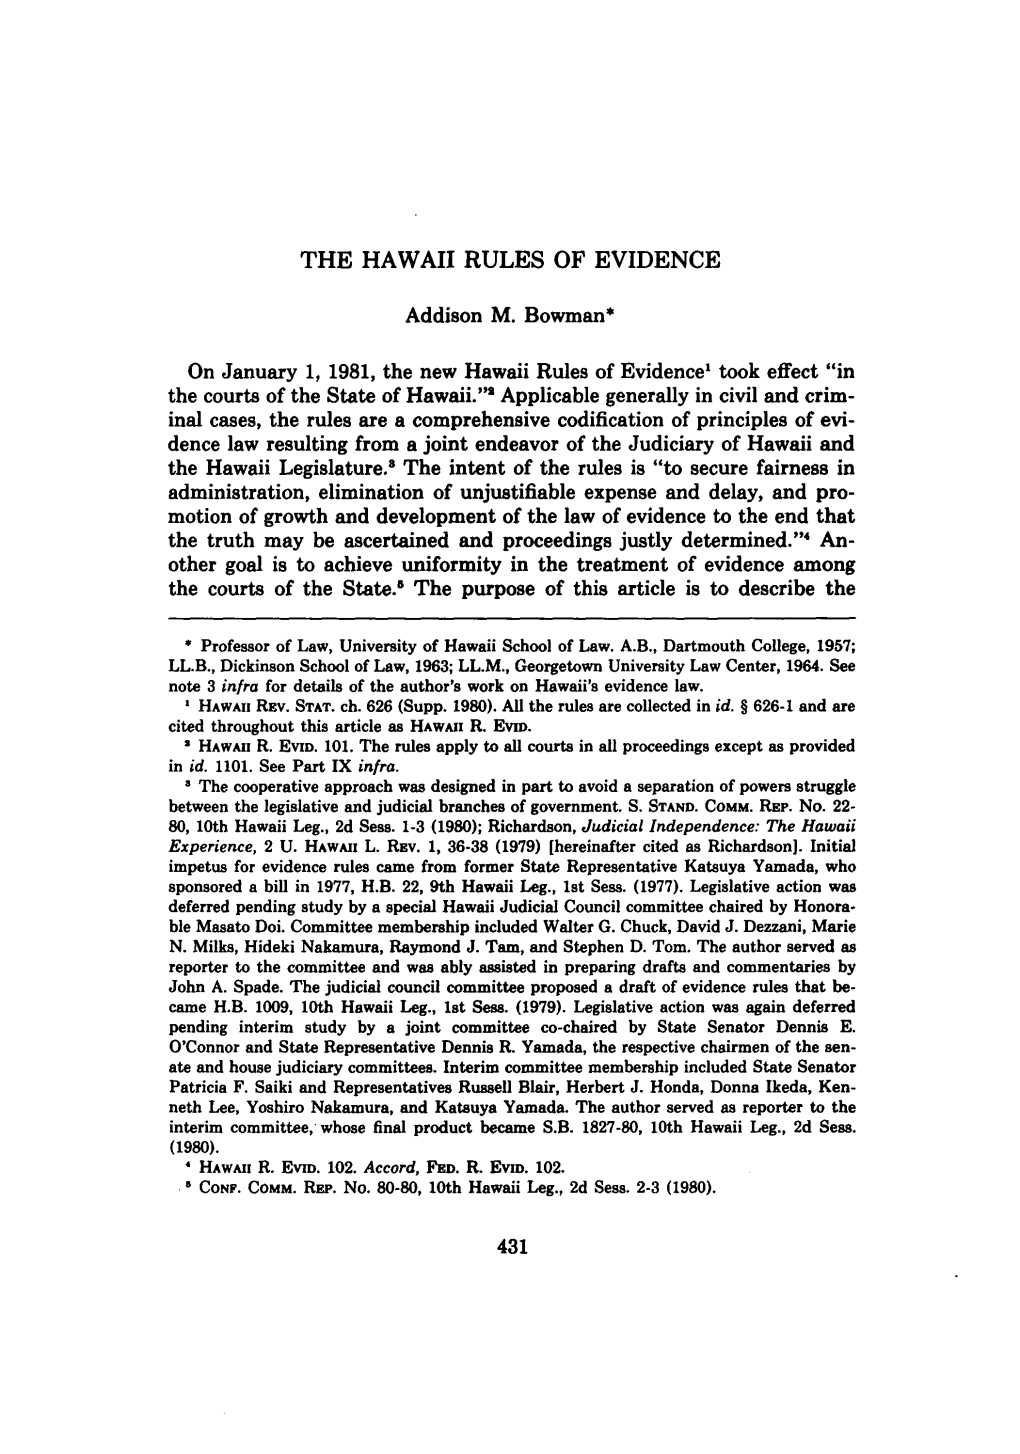 The Hawaii Rules of Evidence